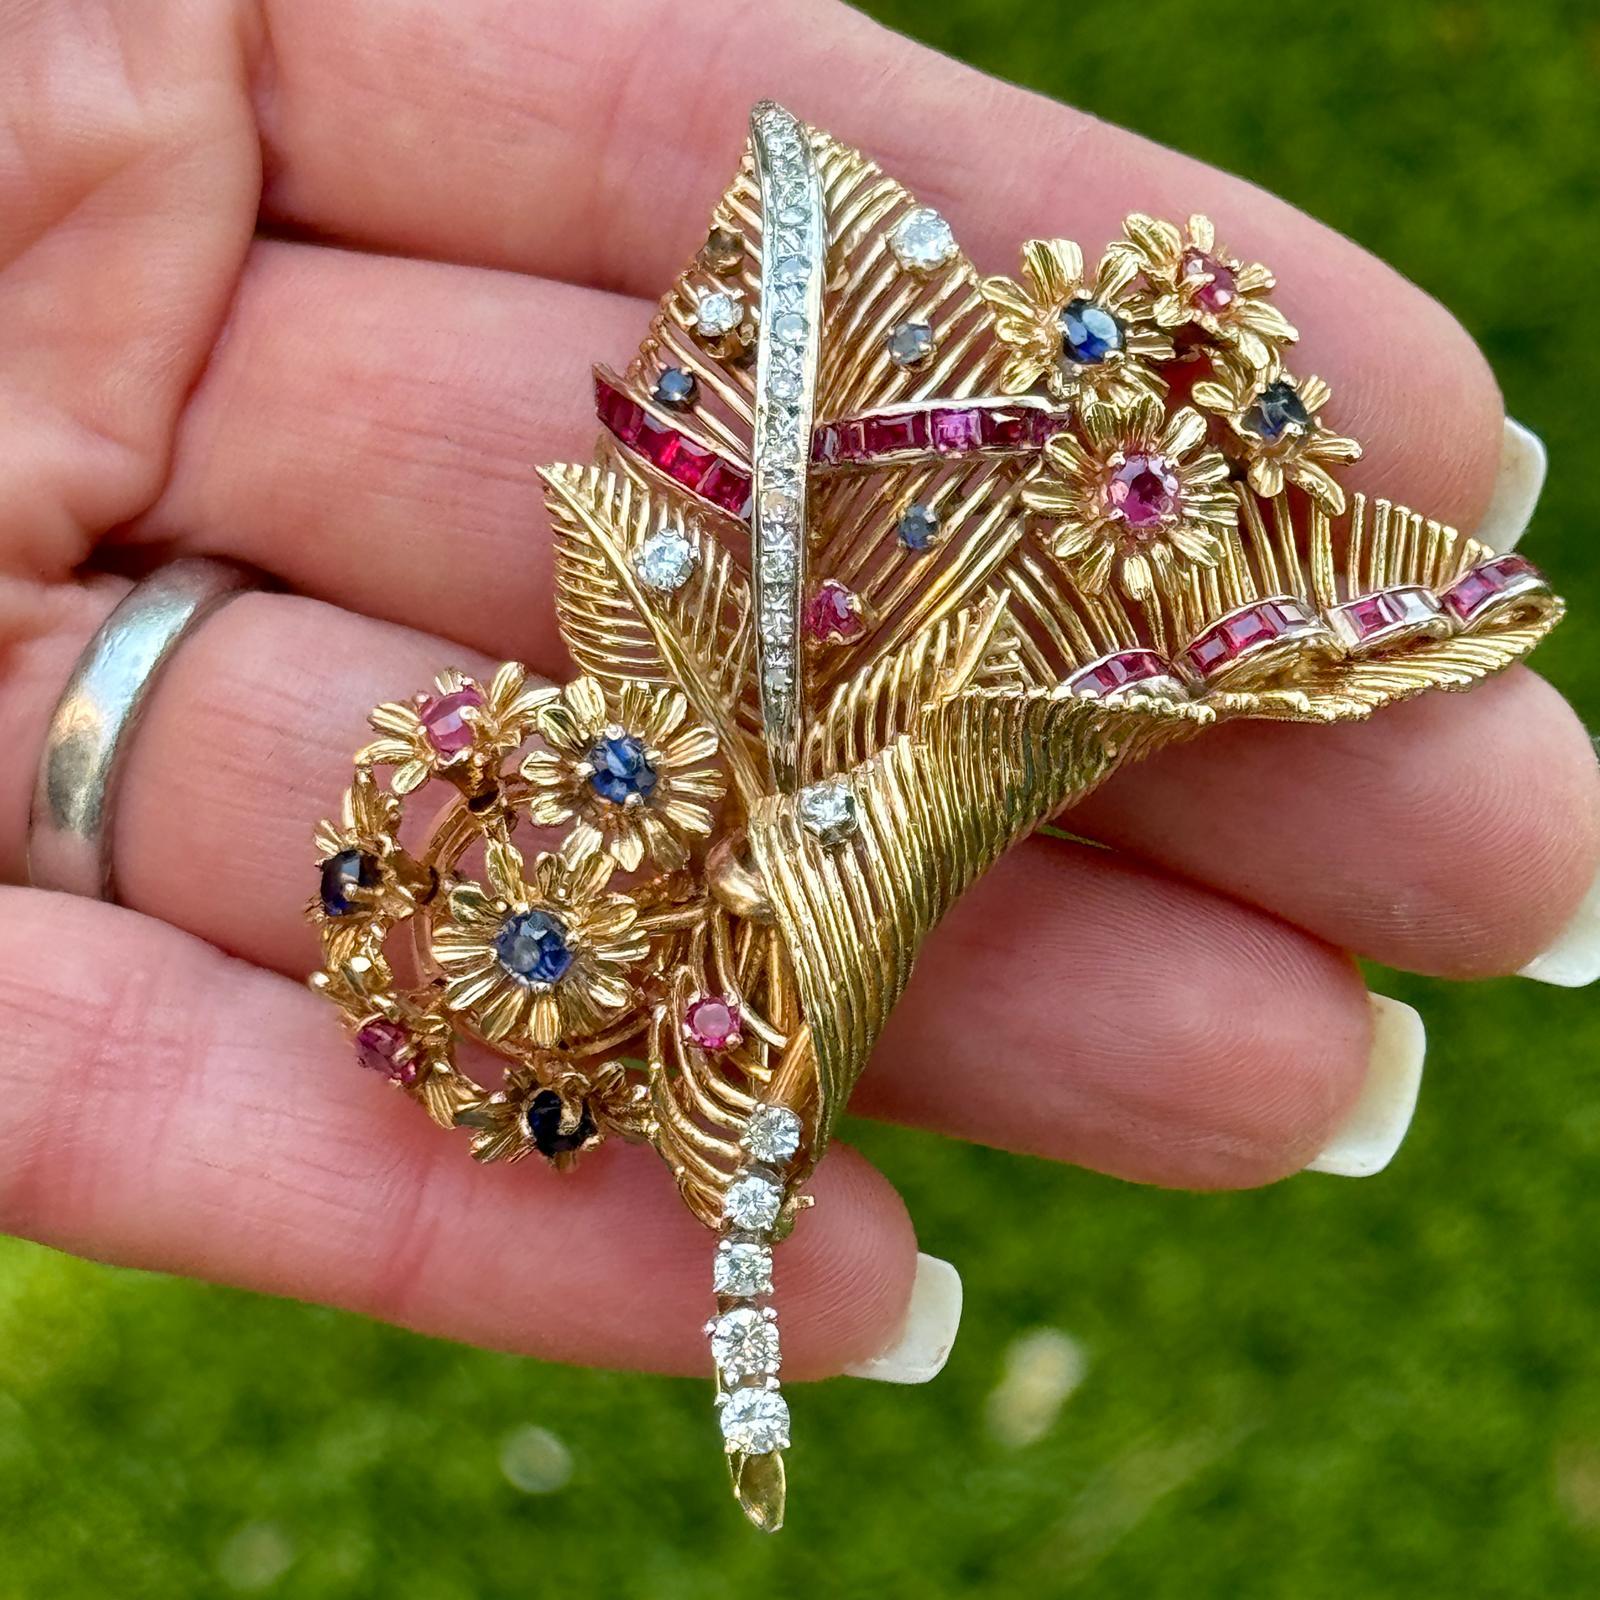 This exquisite tremblant brooch in 14 karat yellwo gold is a display of elegance and movement. What makes this brooch unique is its tremblant feature, where the gemstone flowers tremble or sway with movement, creating an eye catching effect. The